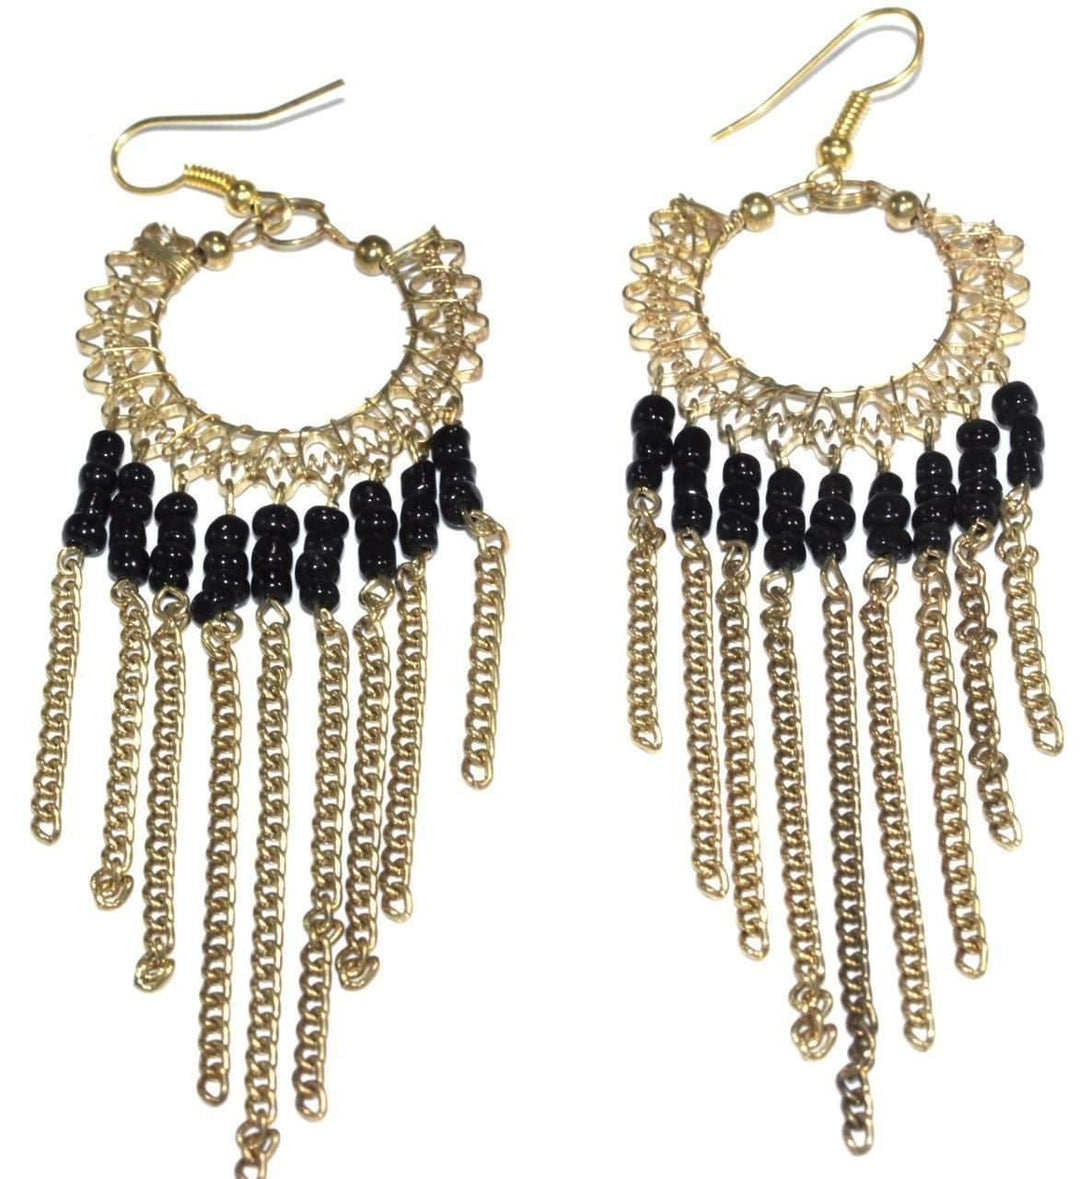 Jaali Chains And Filigree Beaded Earrings - Brand My Case